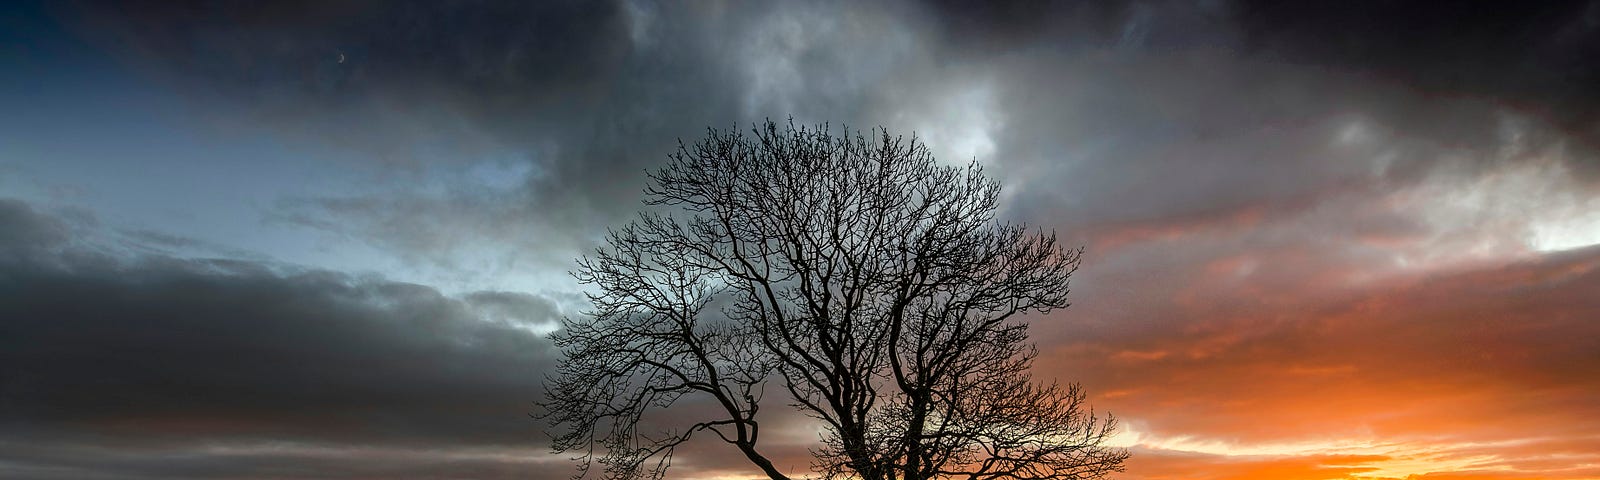 Here is a photo of a stark tree with a beautiful sunset cloudy sky backdrop, a hint of the beauty of Mother Nature, a gift from God.